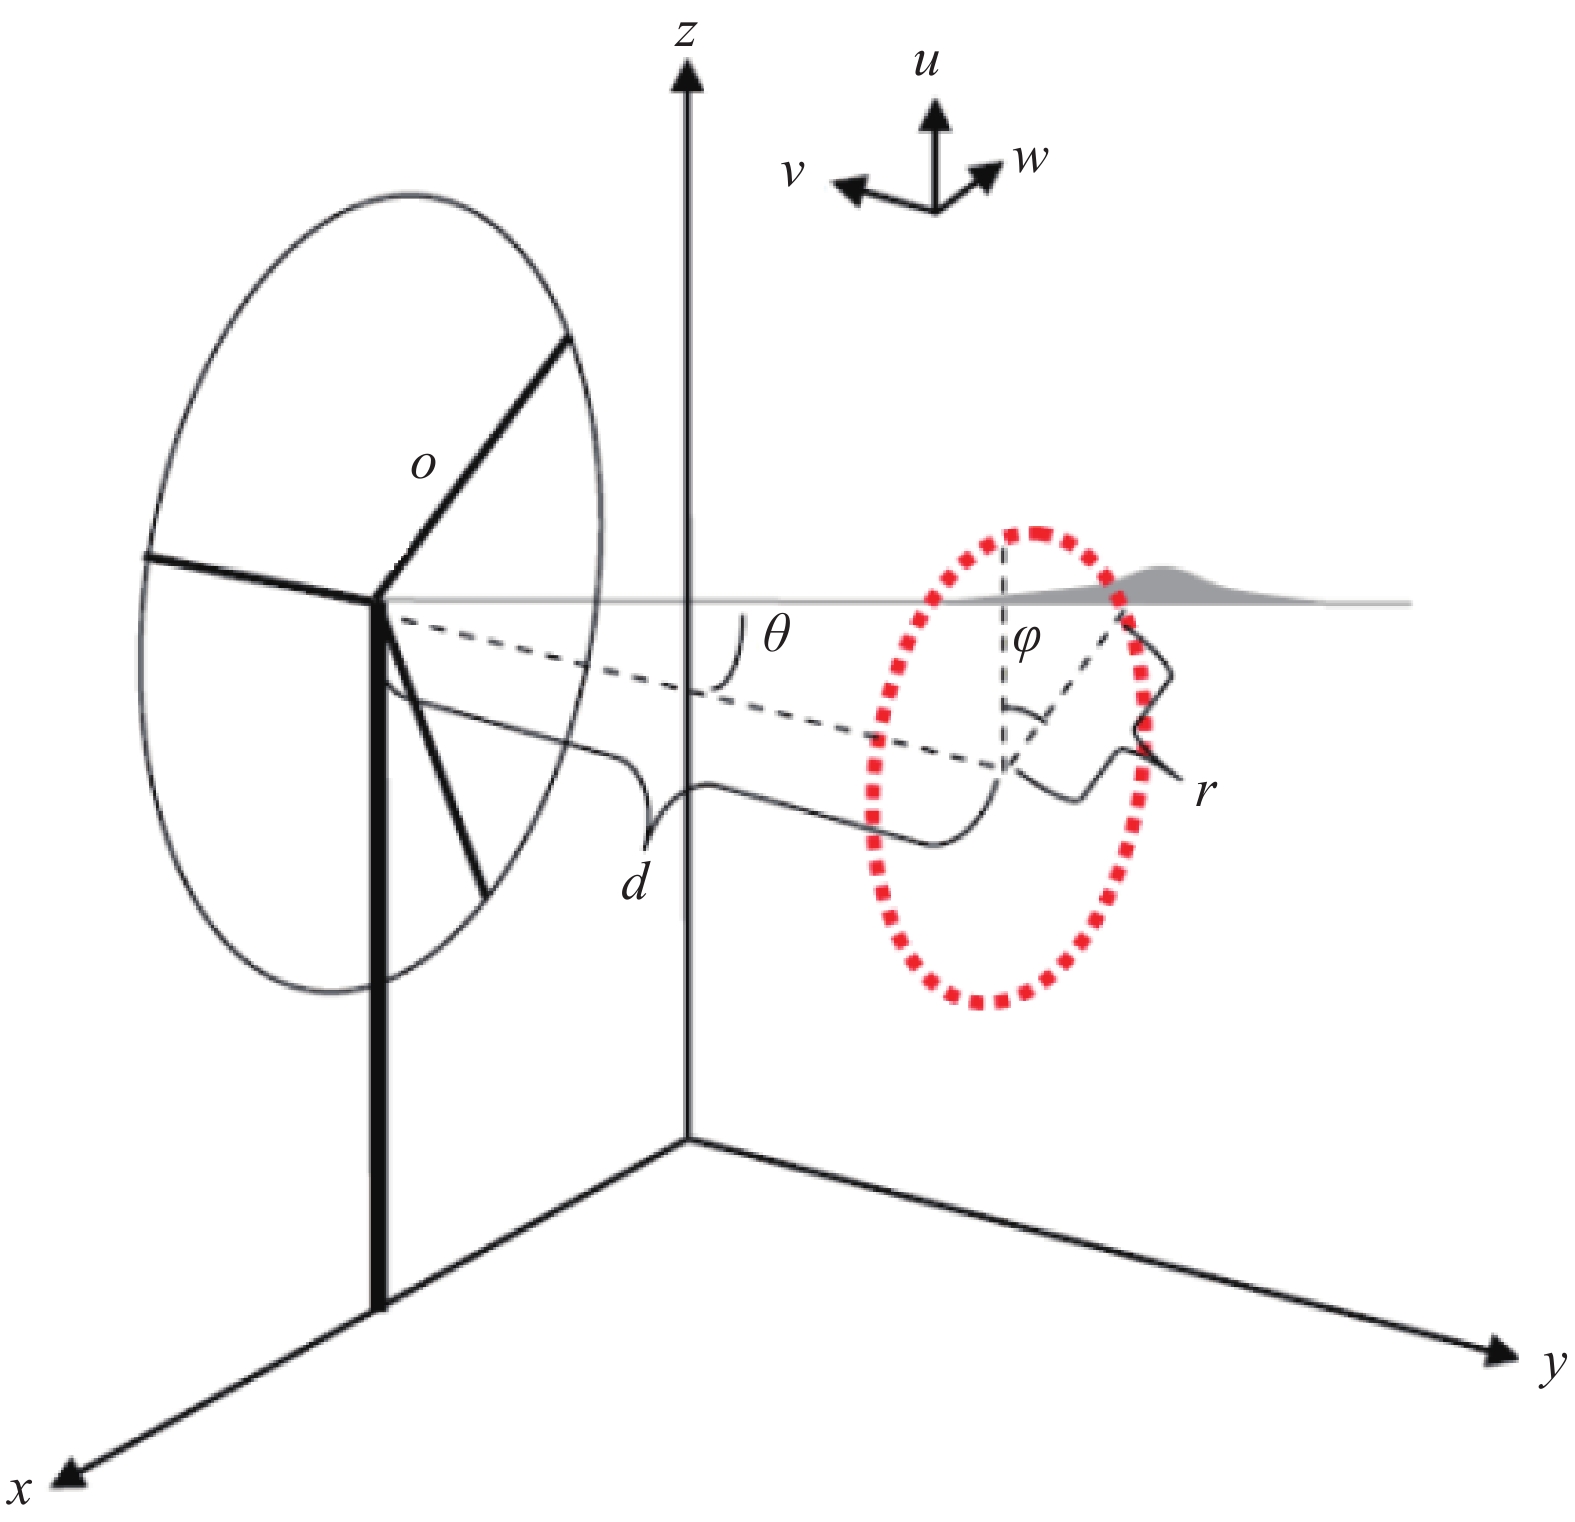 Operation of the laser wind measurement system